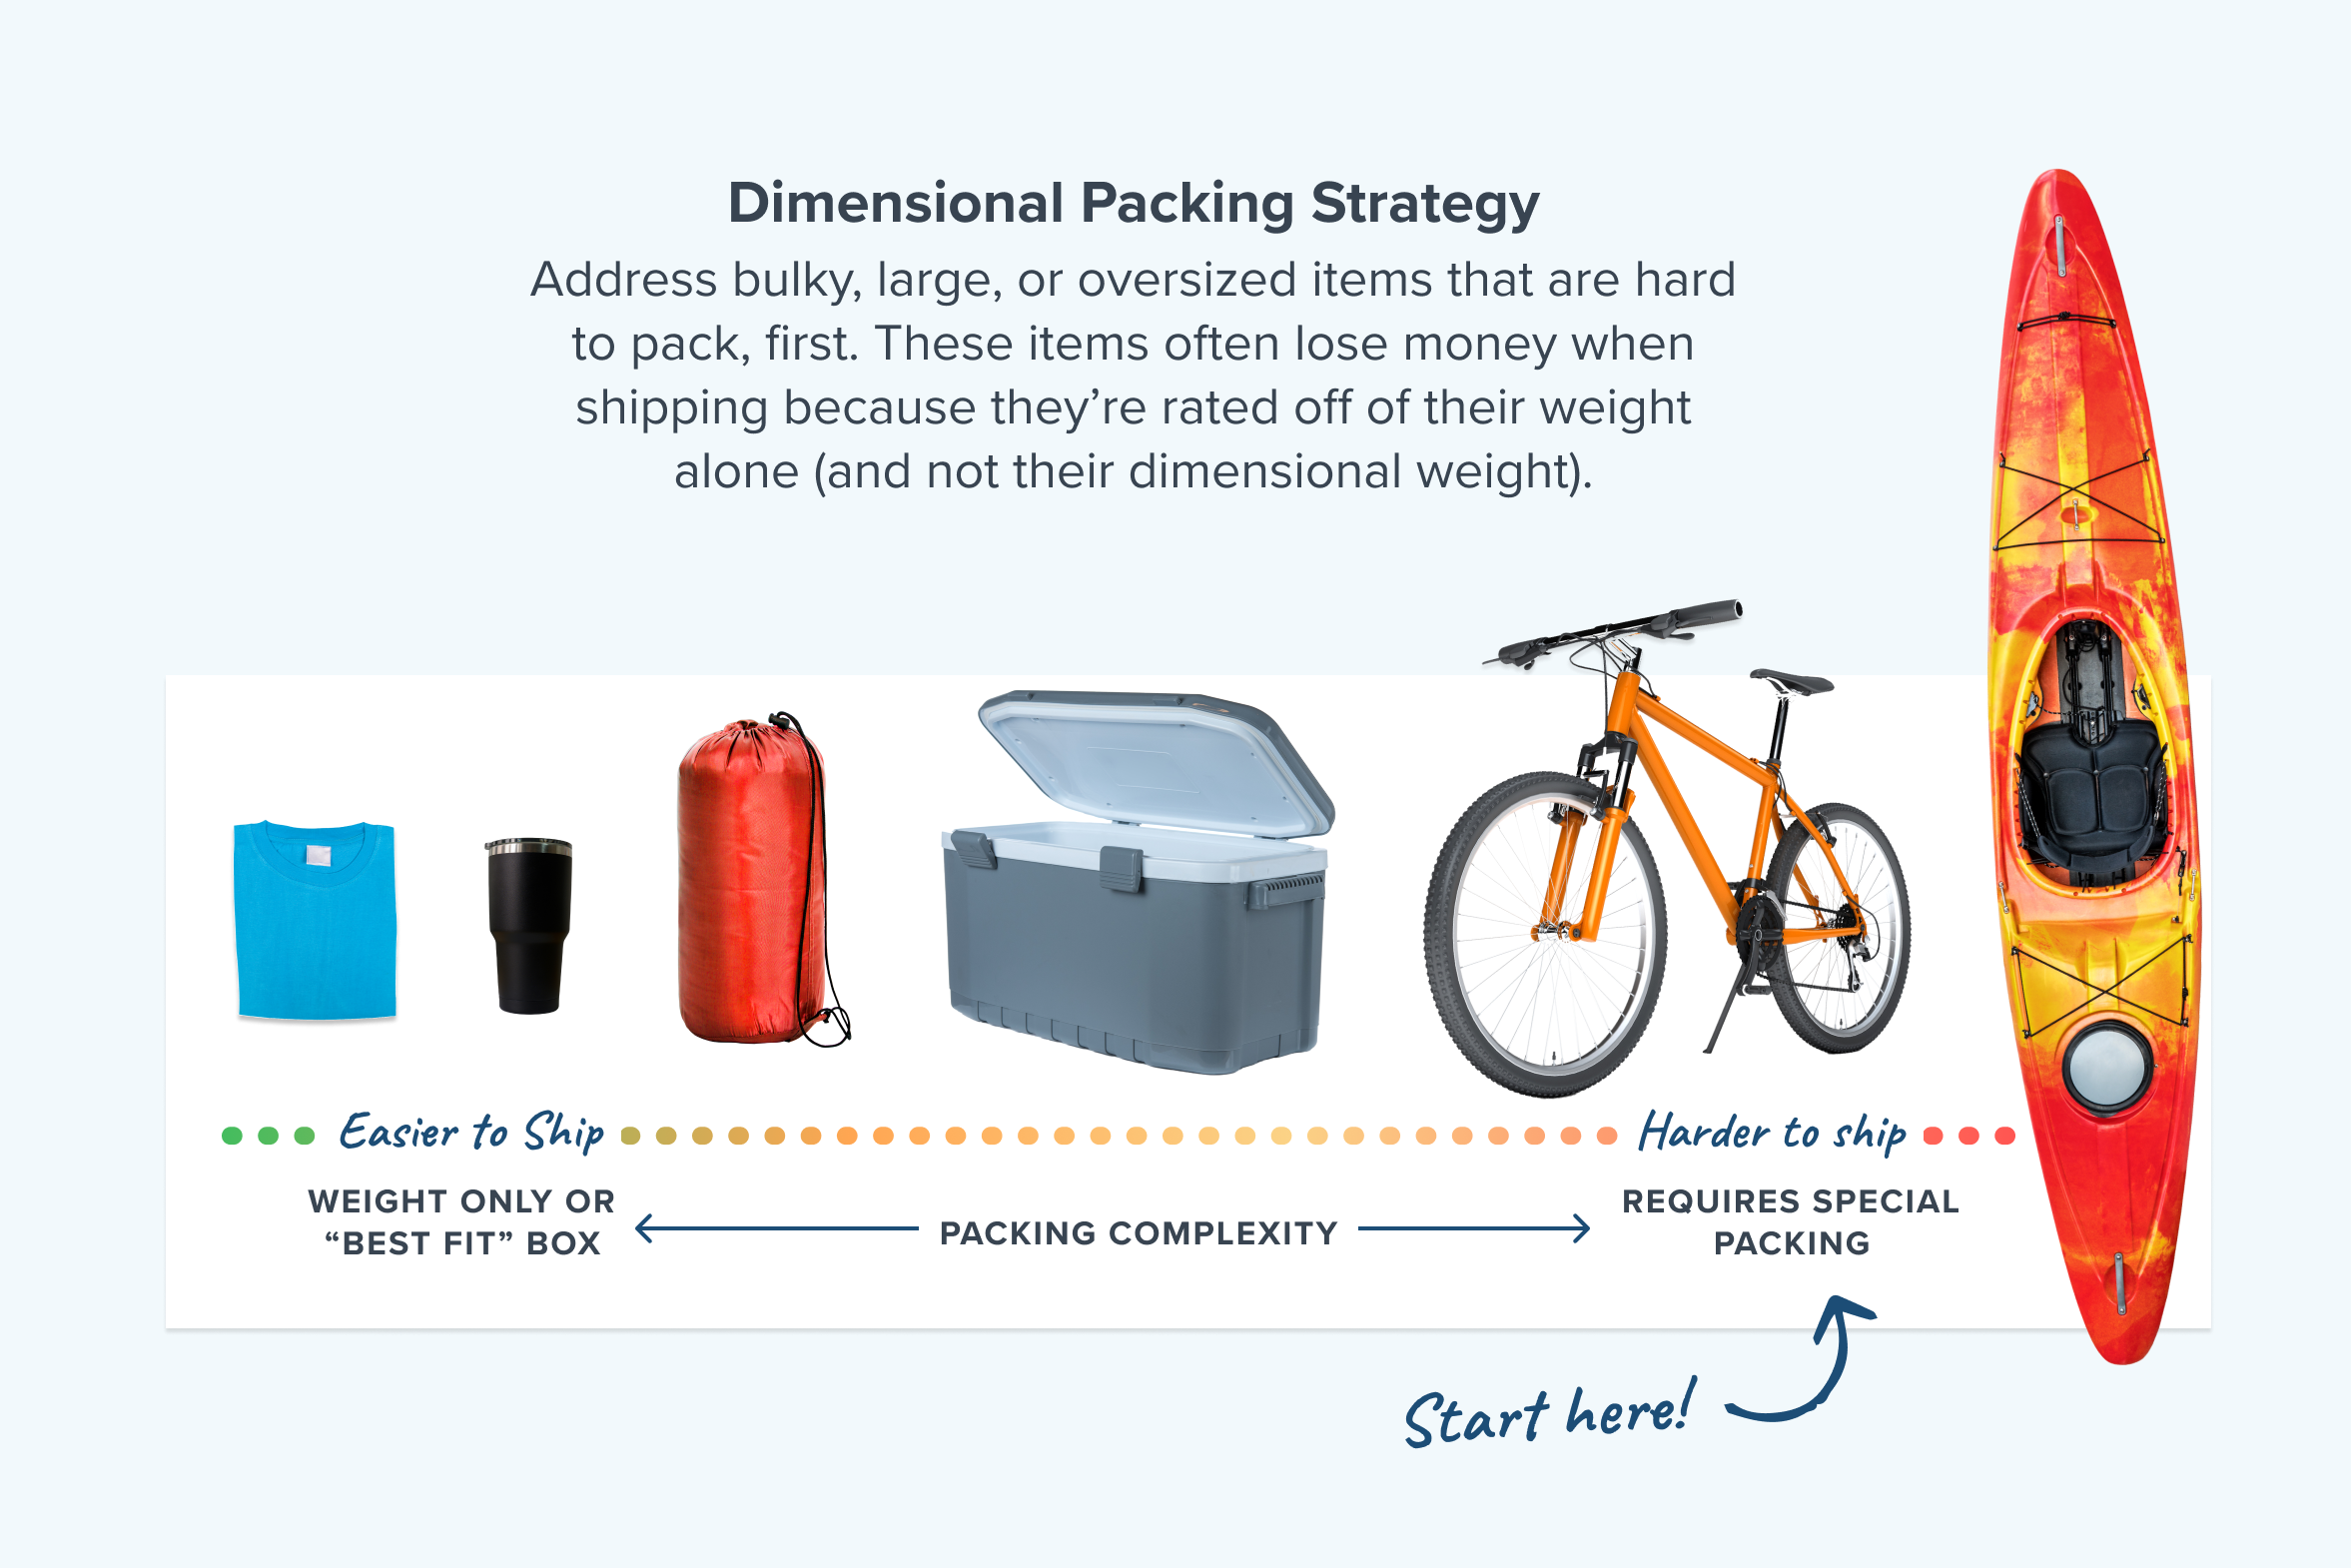 Dimensional packing strategy:
Various products lined up from simple to pack to complicated to pack—with the focus on packing complicated items first.